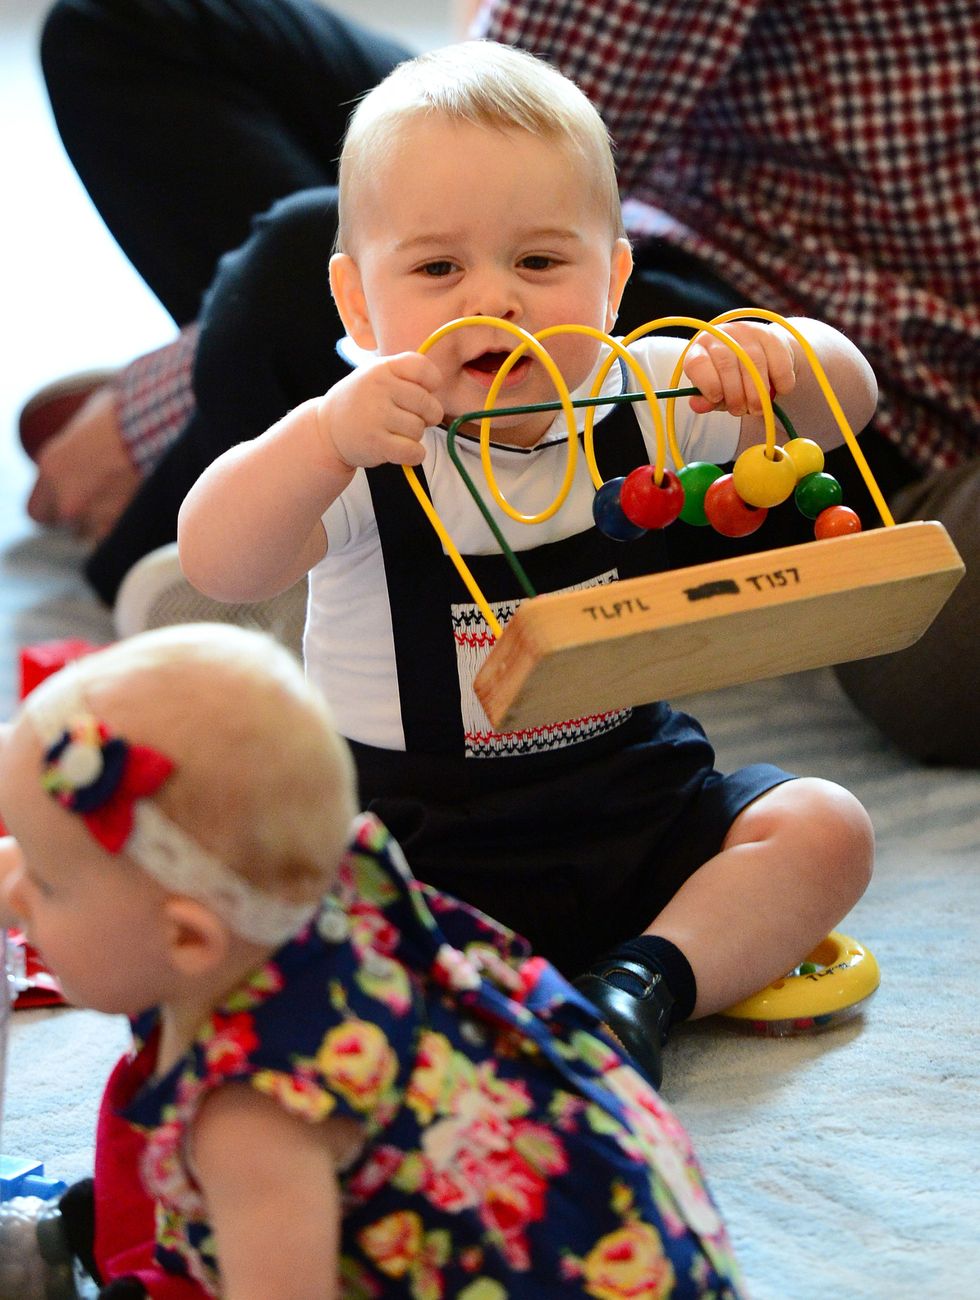 Child, Toddler, Yellow, Play, Fun, Toy, Musical instrument, Baby, Vacation, Party, 